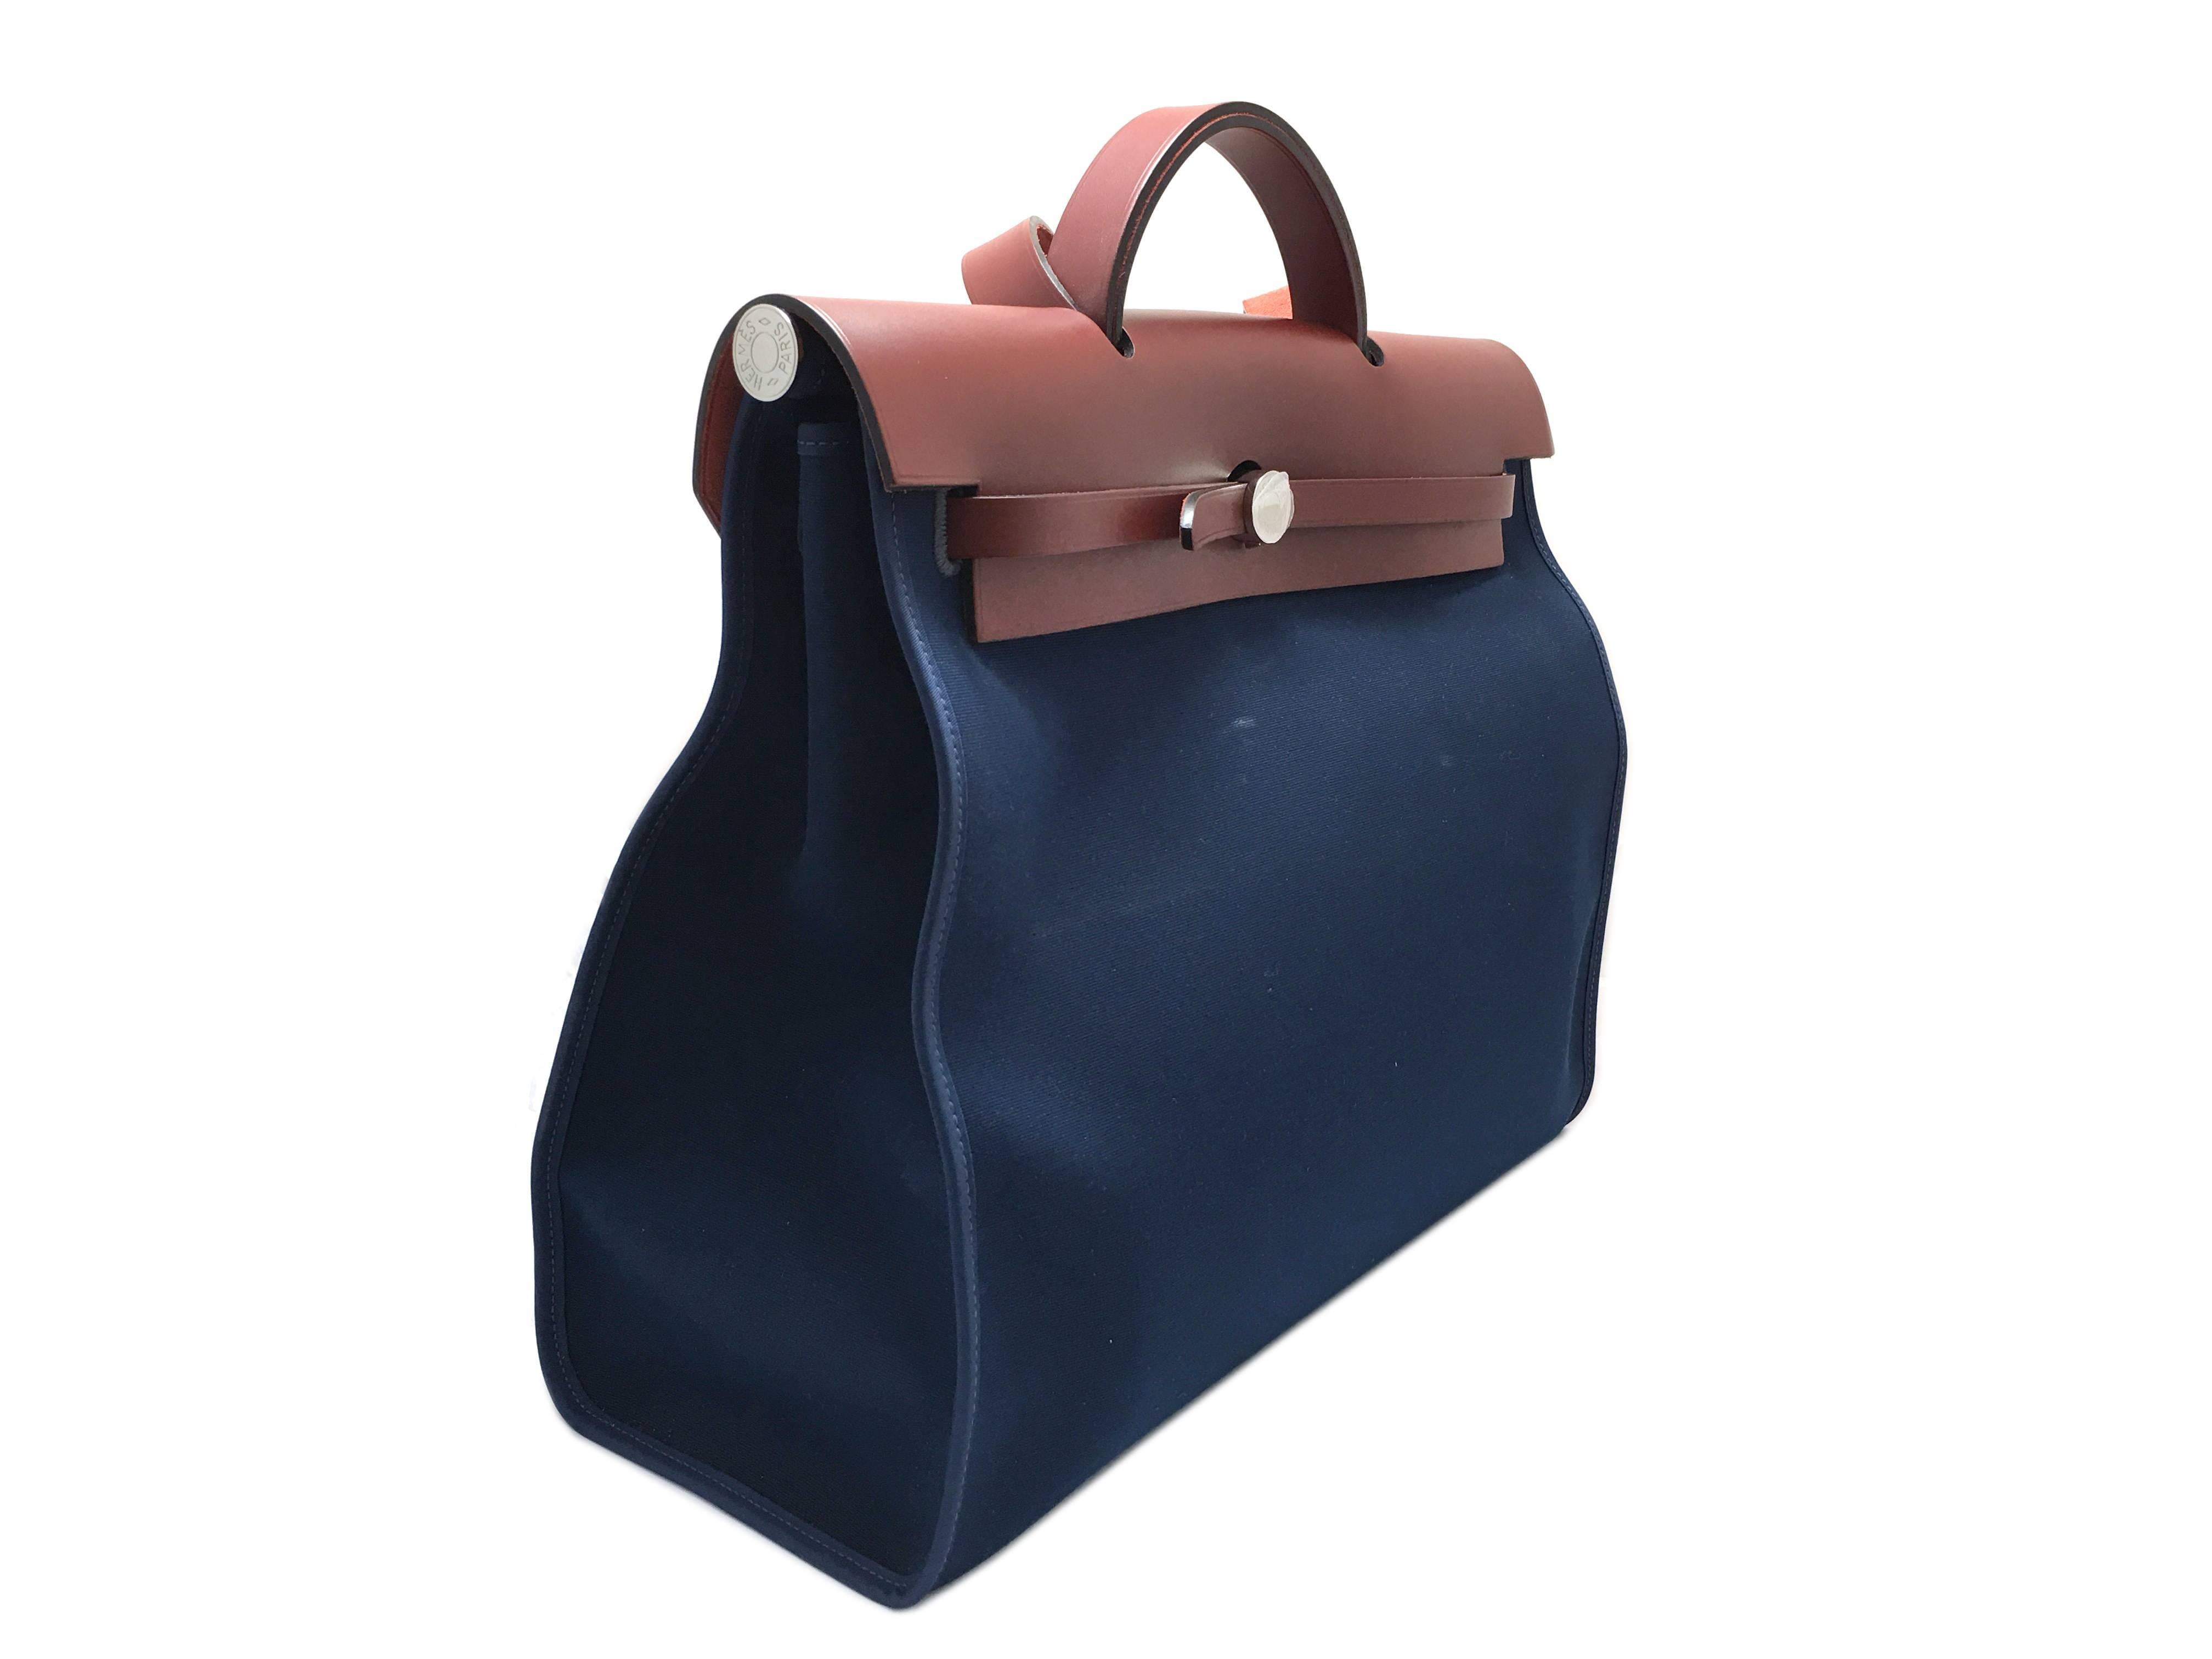 Color: Bleu Indigo
Material: Canvas

Condition:
Rank S
Overall: Almost New
Surface:Minor Scratches 
Corners:Good
Edges:Good
Handles/Straps:Good
Hardware:Good

Dimensions:
W39 × H31 × D15cm（W15.3" × H12.2" × D5.9"）
Handle: